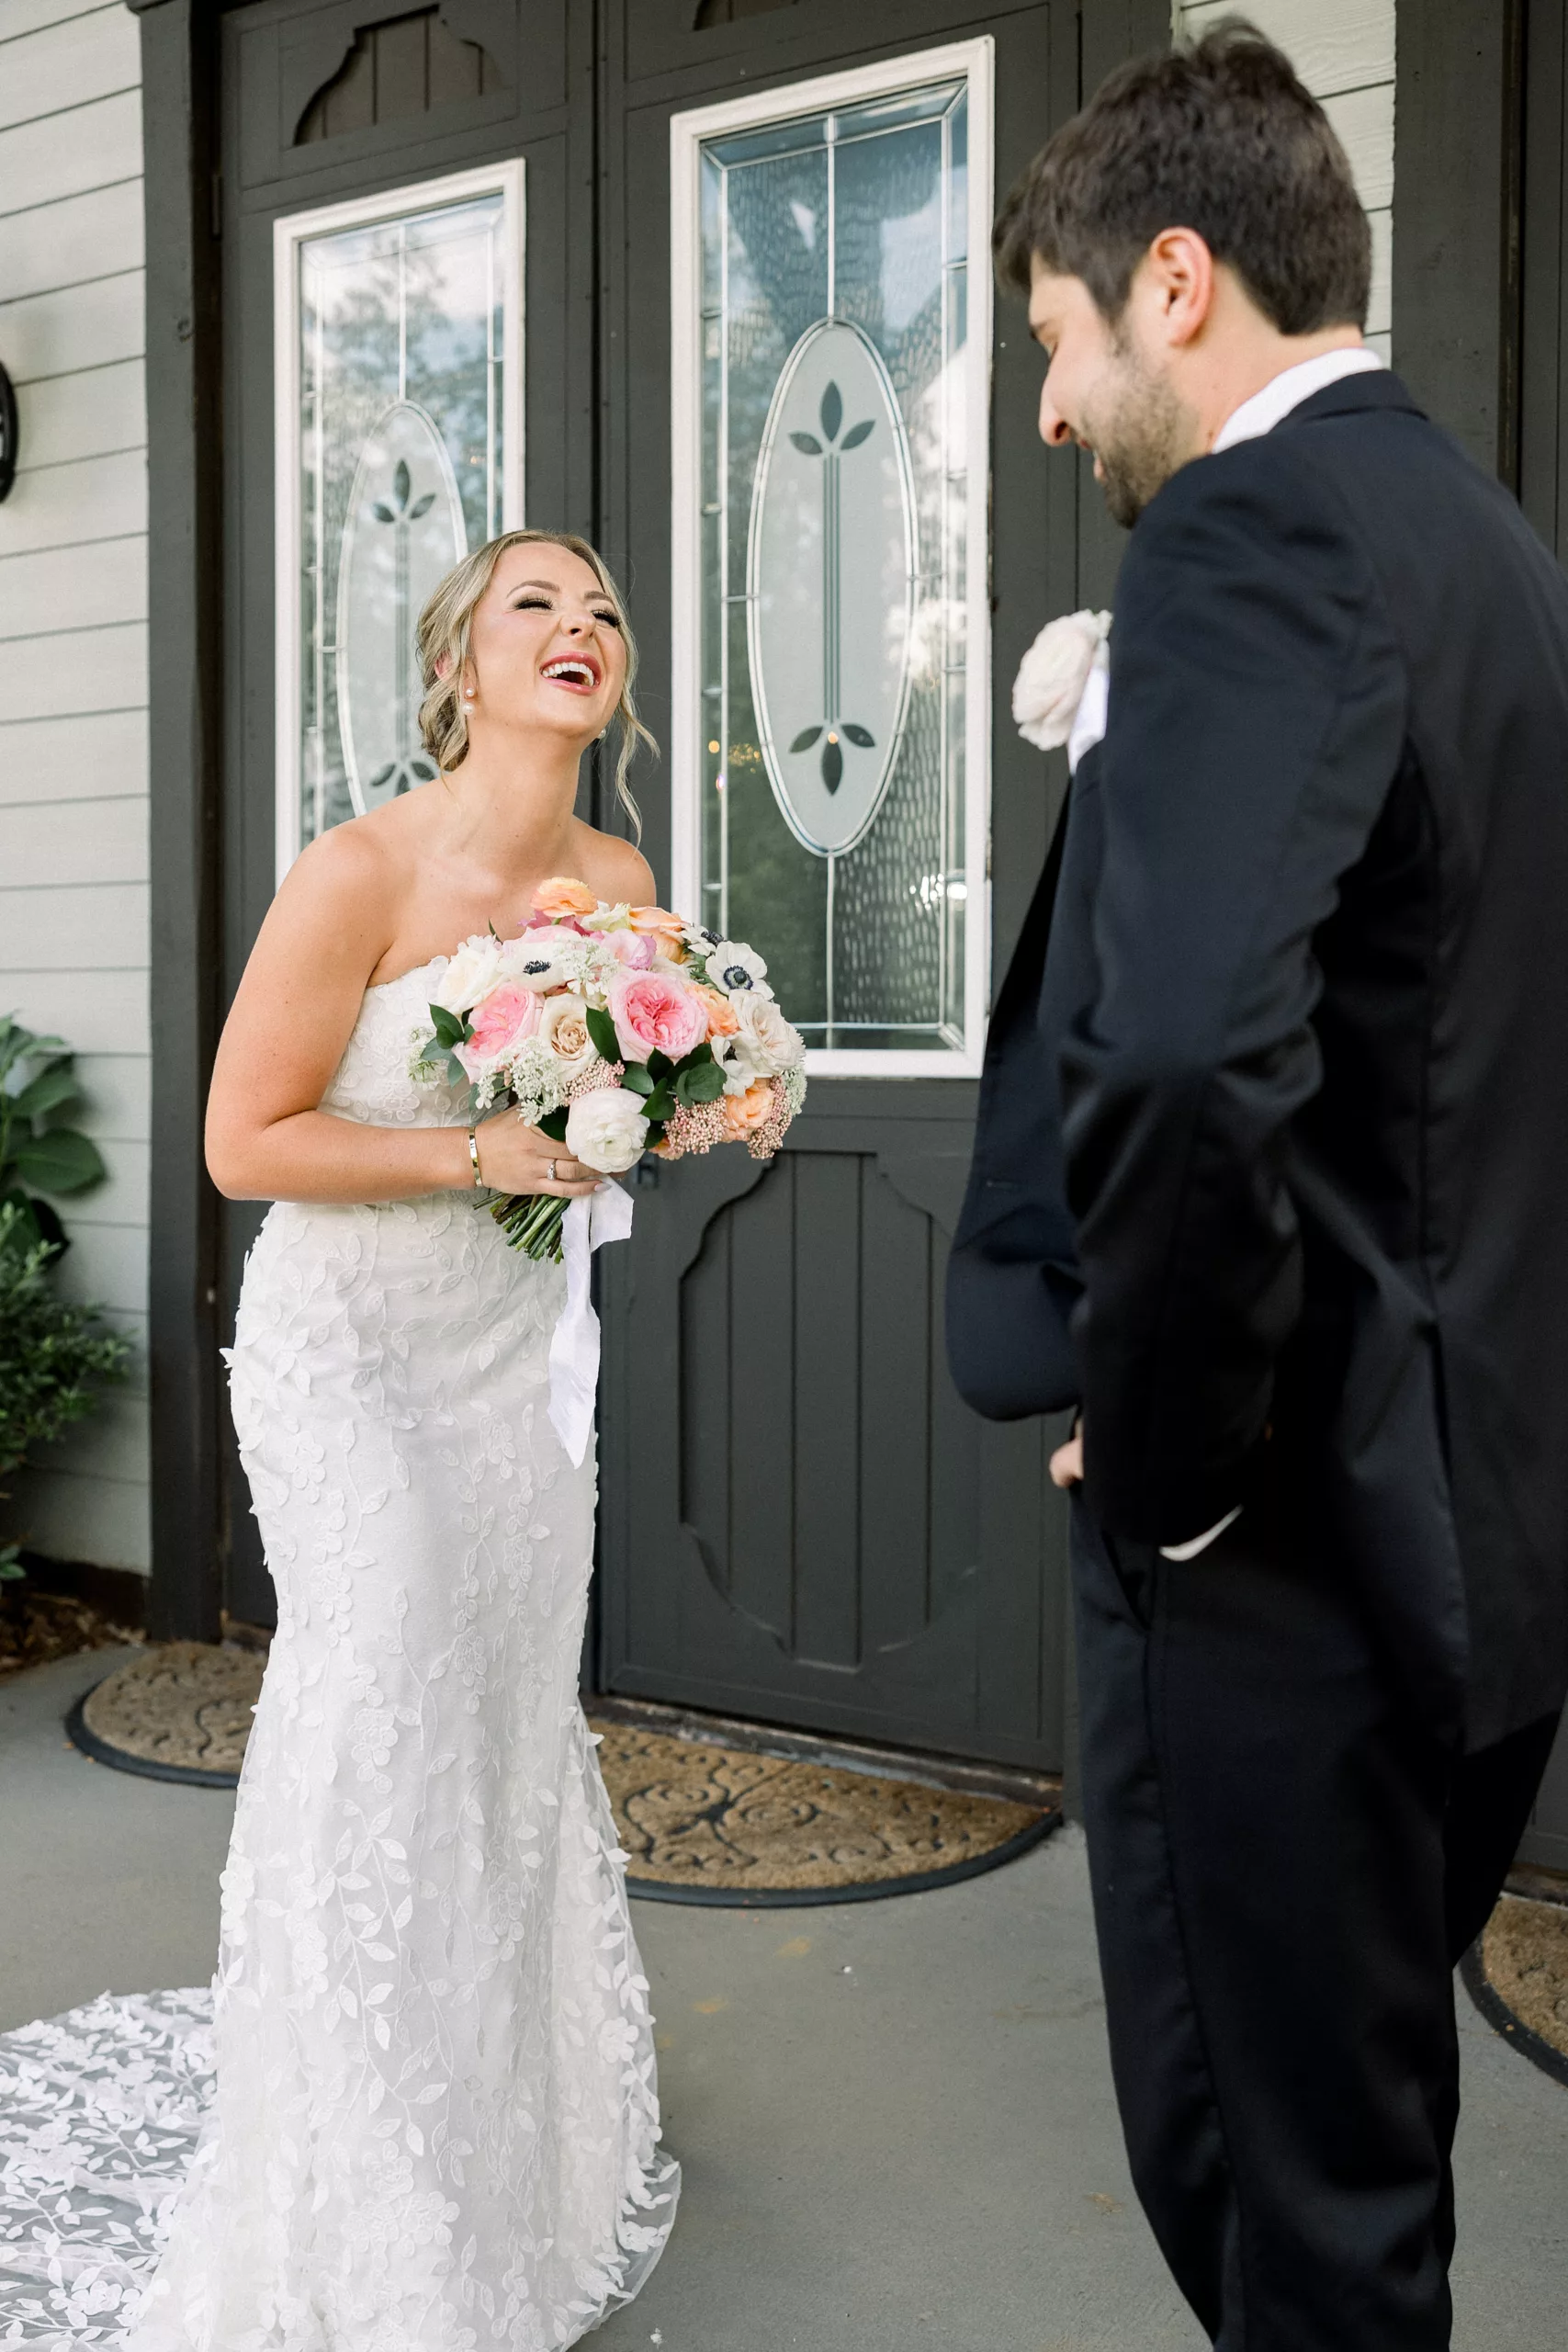 A bride laughs in her dress while holding her pink bouquet as her groom in a black suit sees her for the first time before the ceremony